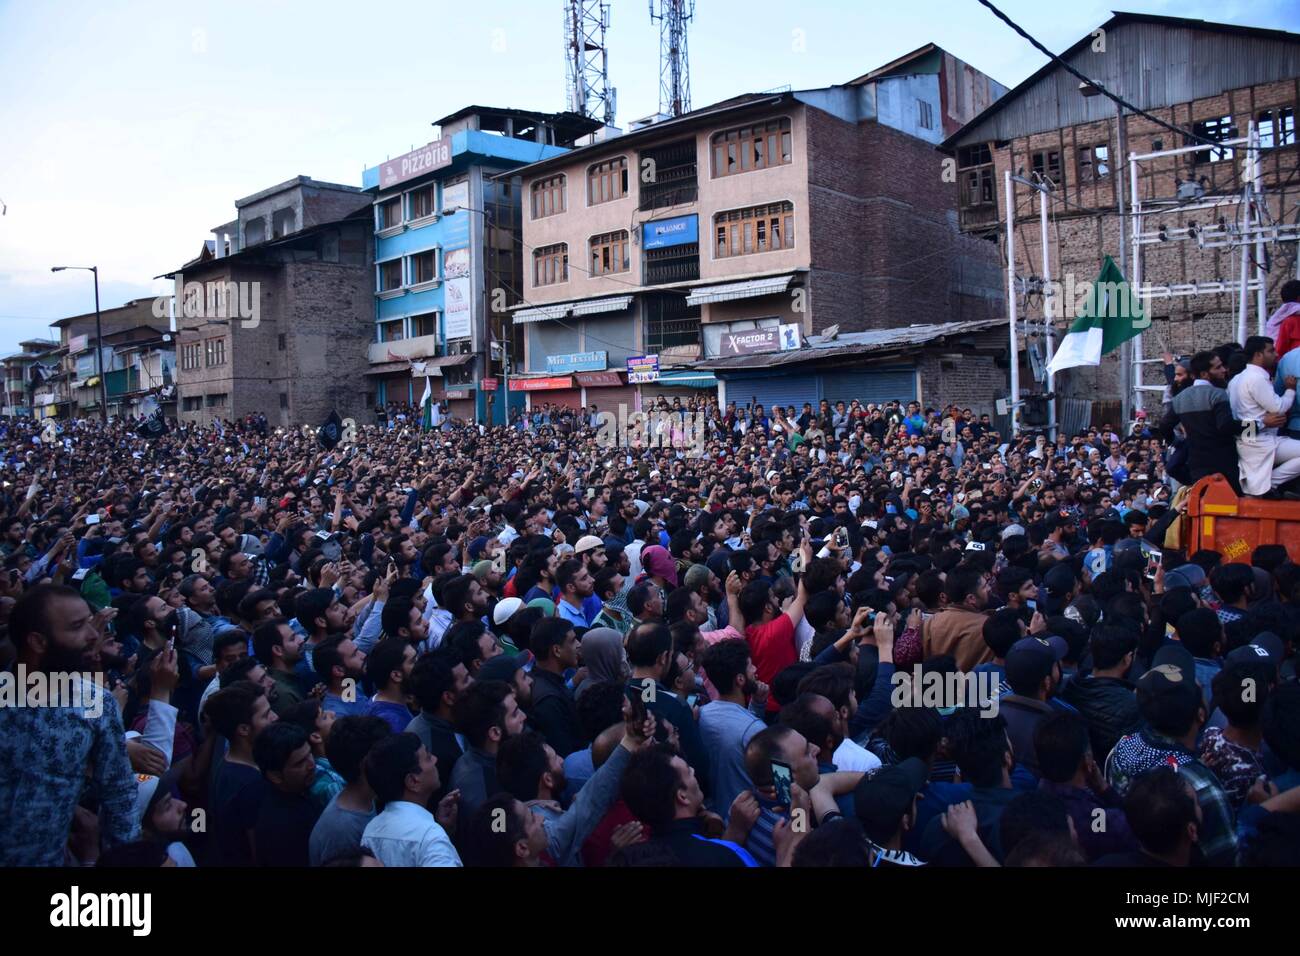 Srinagar, Jammu & Kashmir, India, May 5, 2018.  Thousands of people attended the funeral procession of Local Militant Fayaz Ahmed Hamal At his residence Khankah area of Srinagar.Multiple Funeral processions held in srinagar summer capital of Indian Kashmir on Saturday of Fayaz Ahmed Hamal a LeT (Lashkar-e-Taiba) Militant and a Civilian Adil Ahmed Yatoo who were killed by armoured vehicle on Saturday during clashes near Encounter site. Credit: ZUMA Press, Inc./Alamy Live News Stock Photo